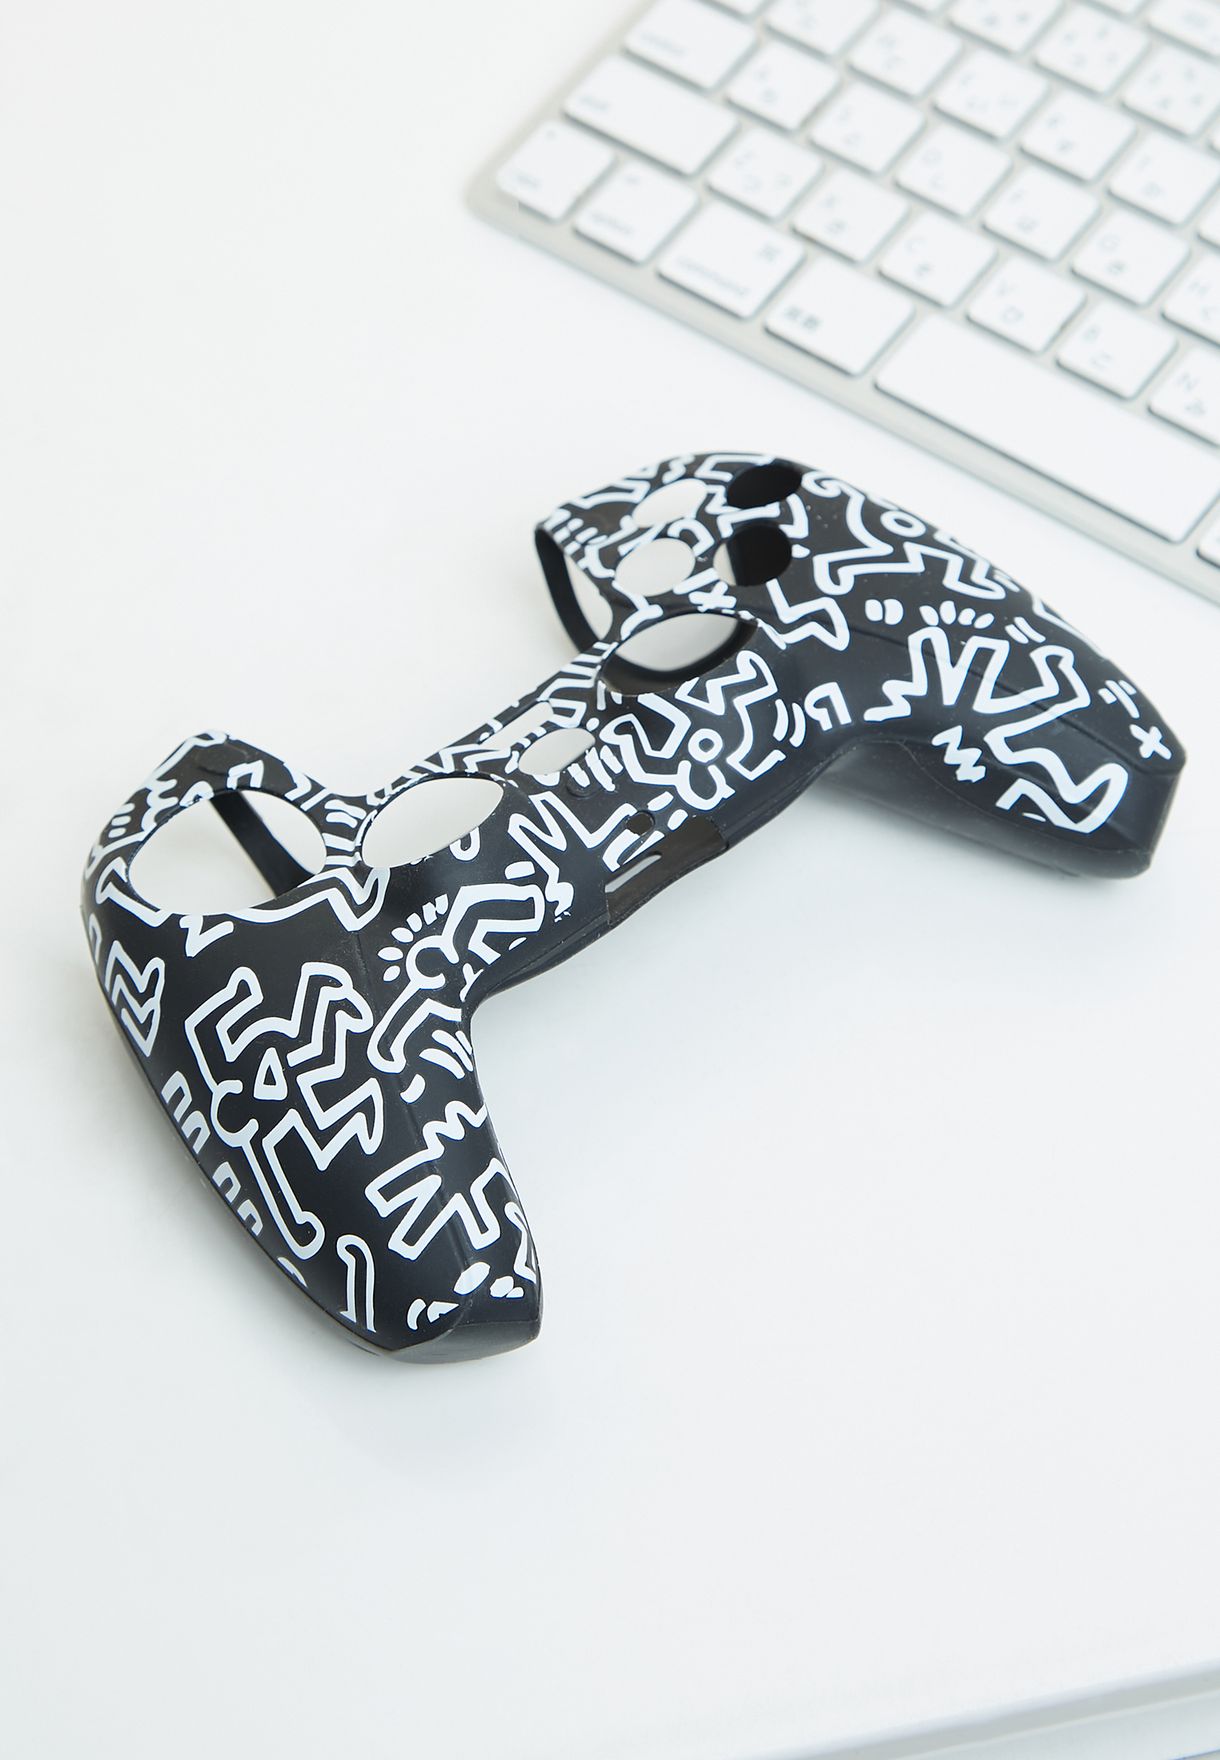 Ps5 Controller Skin